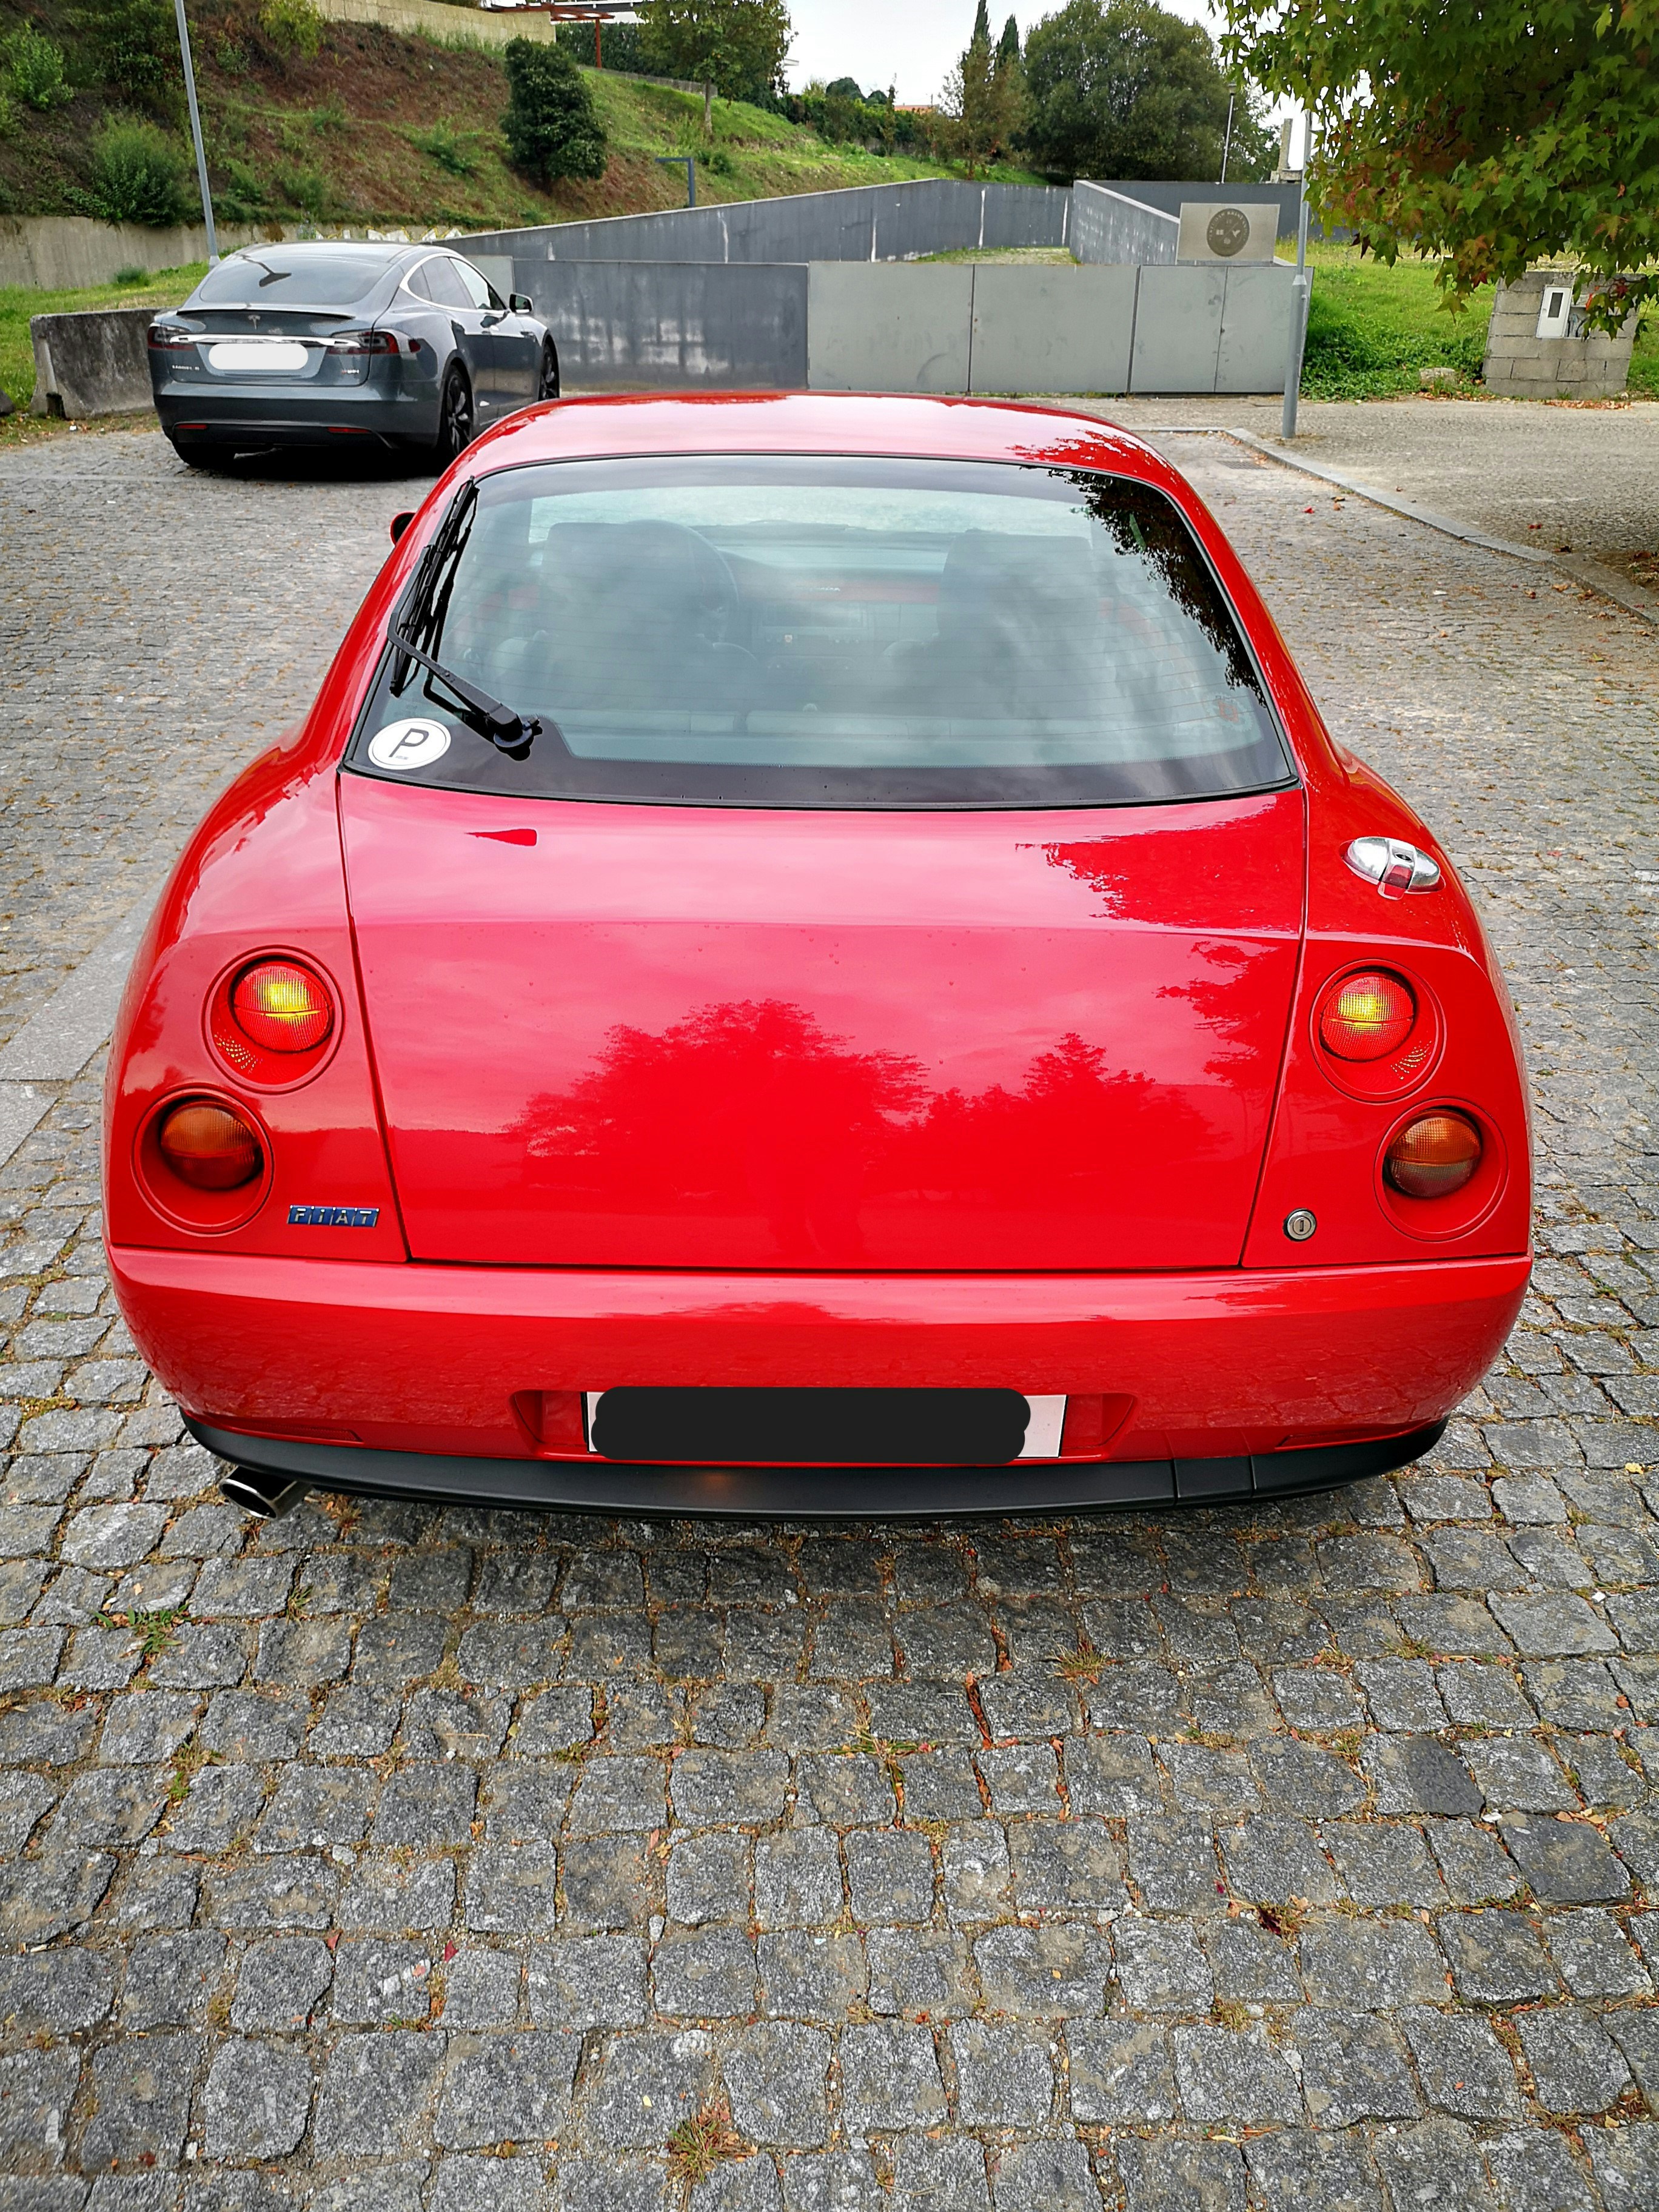 1995 Fiat Coupe 16V Turbo for sale by classified listing privately in  Guimaraes, Portugal